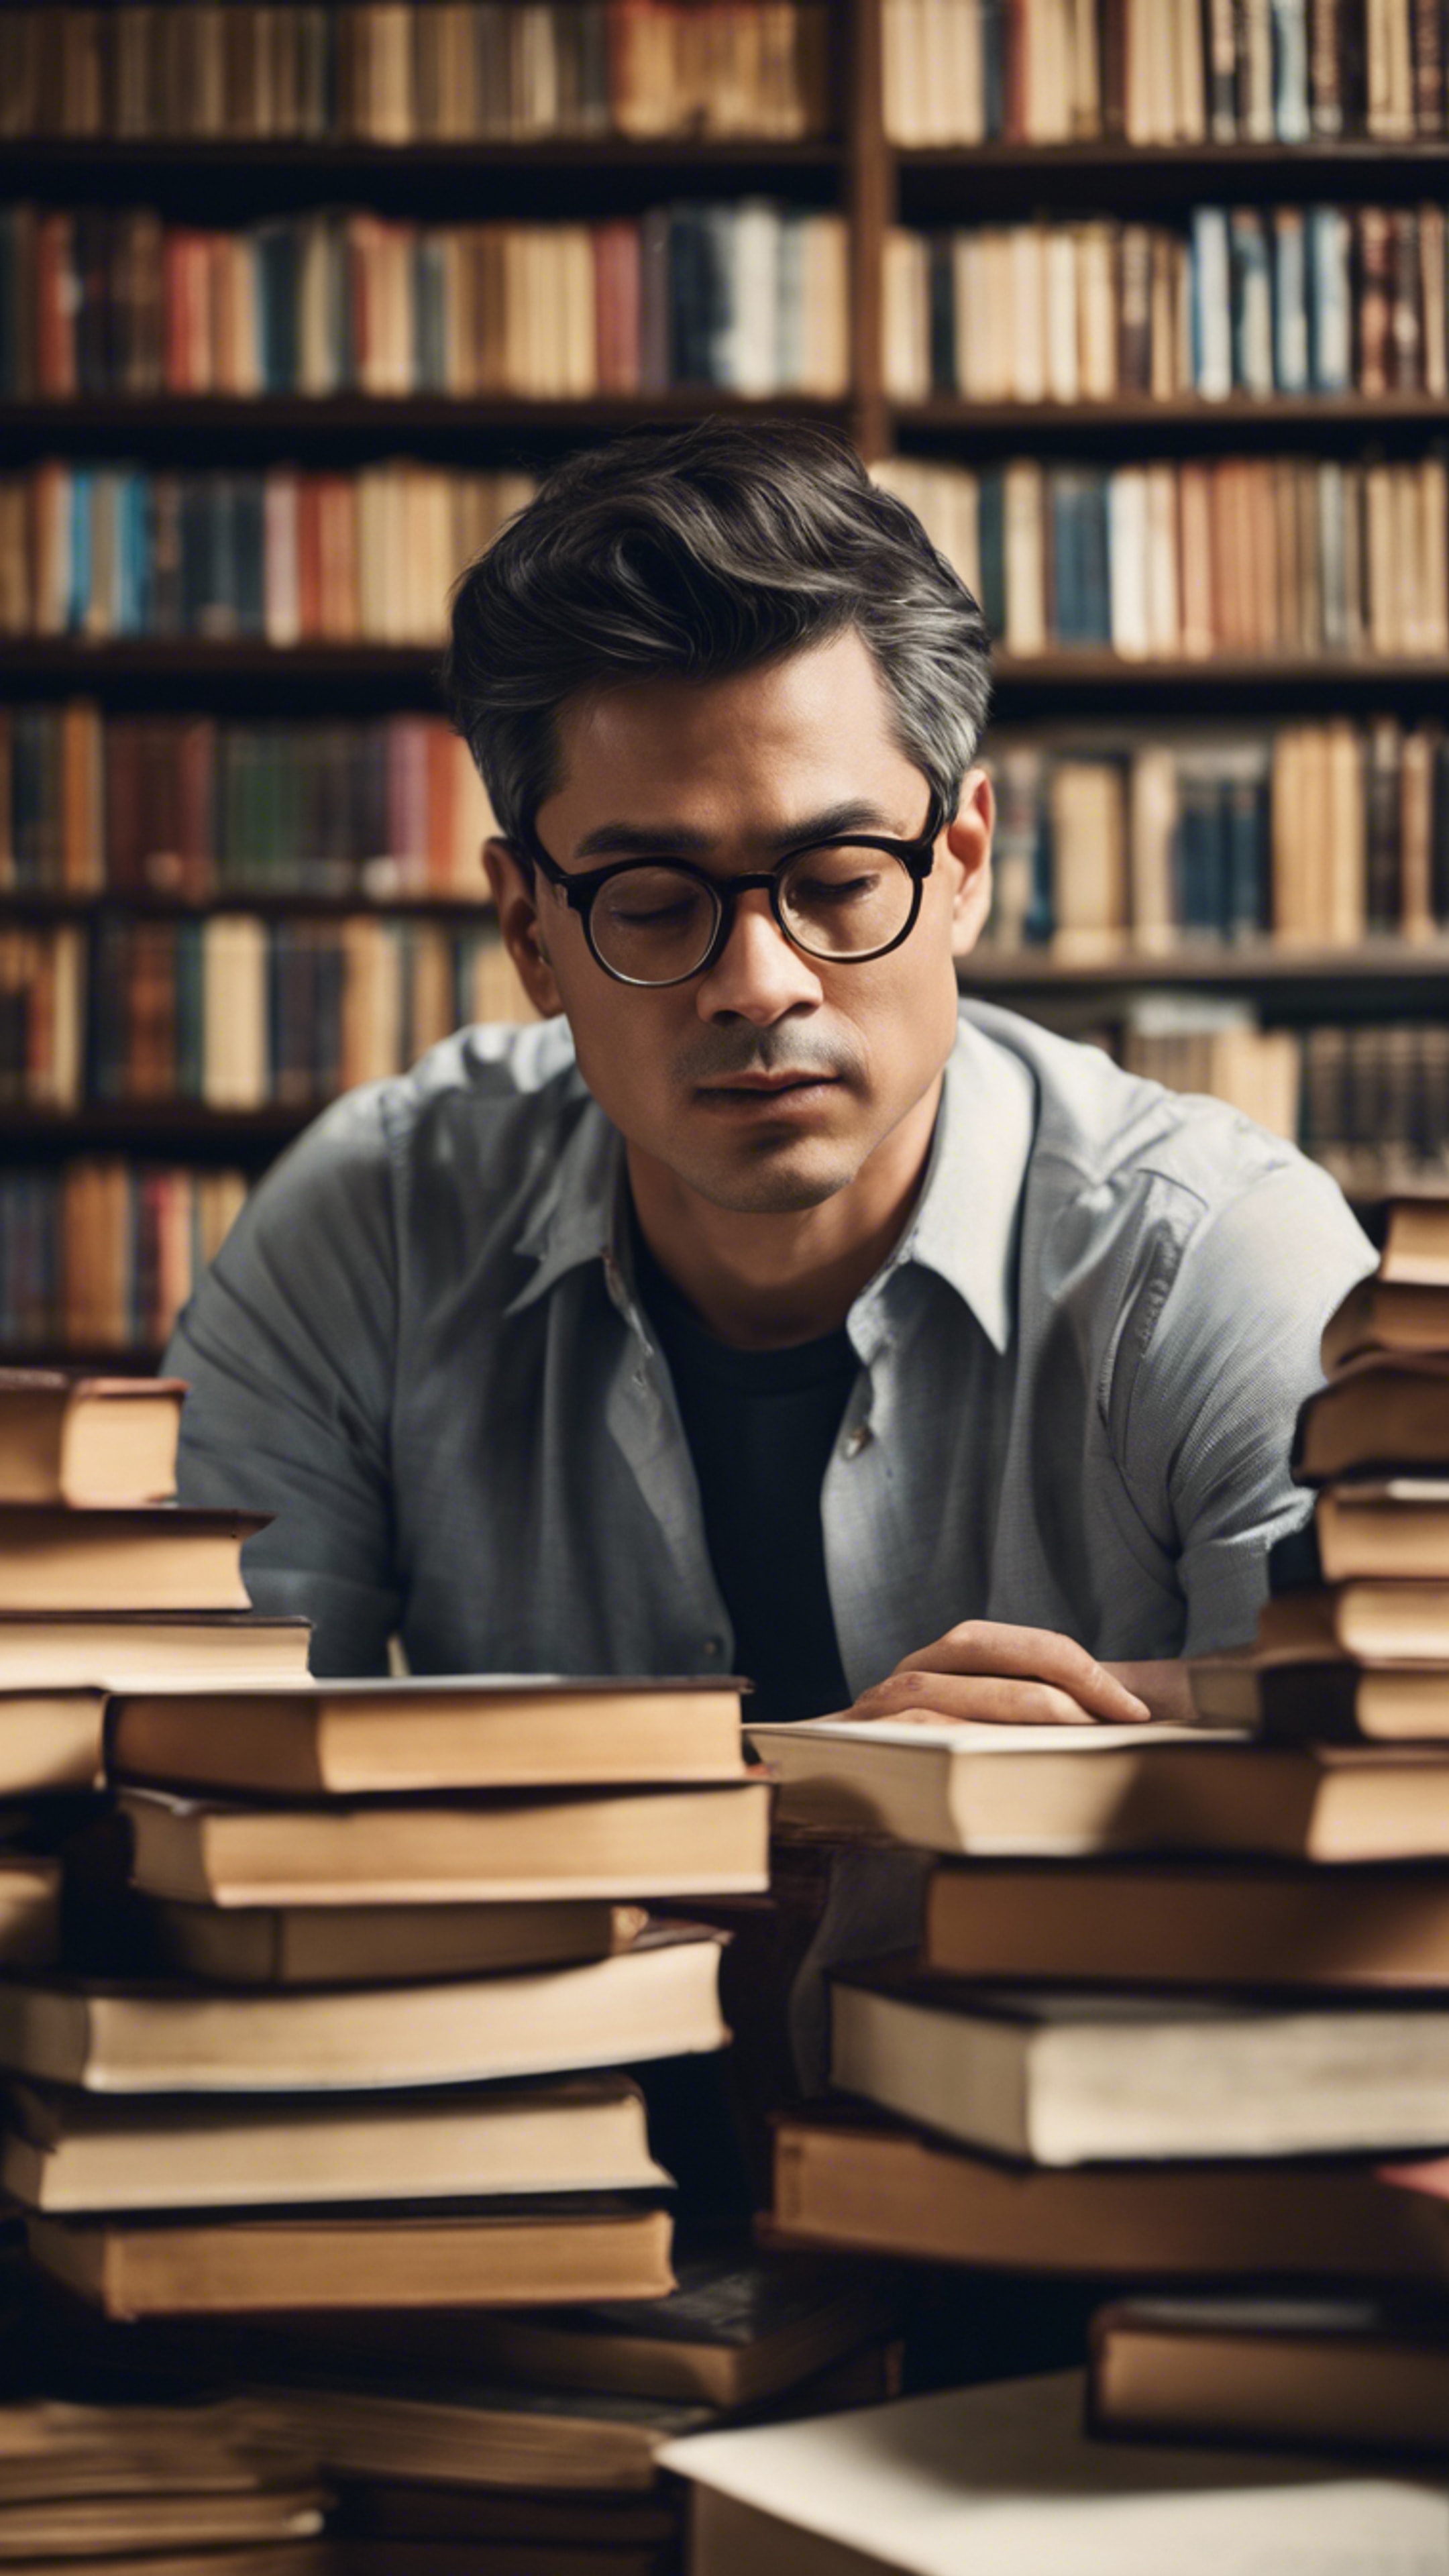 An intelligent man in glasses, deeply engrossed in his studies surrounded by stacks of books in a quiet library. Ფონი[88f4531613da45079a41]